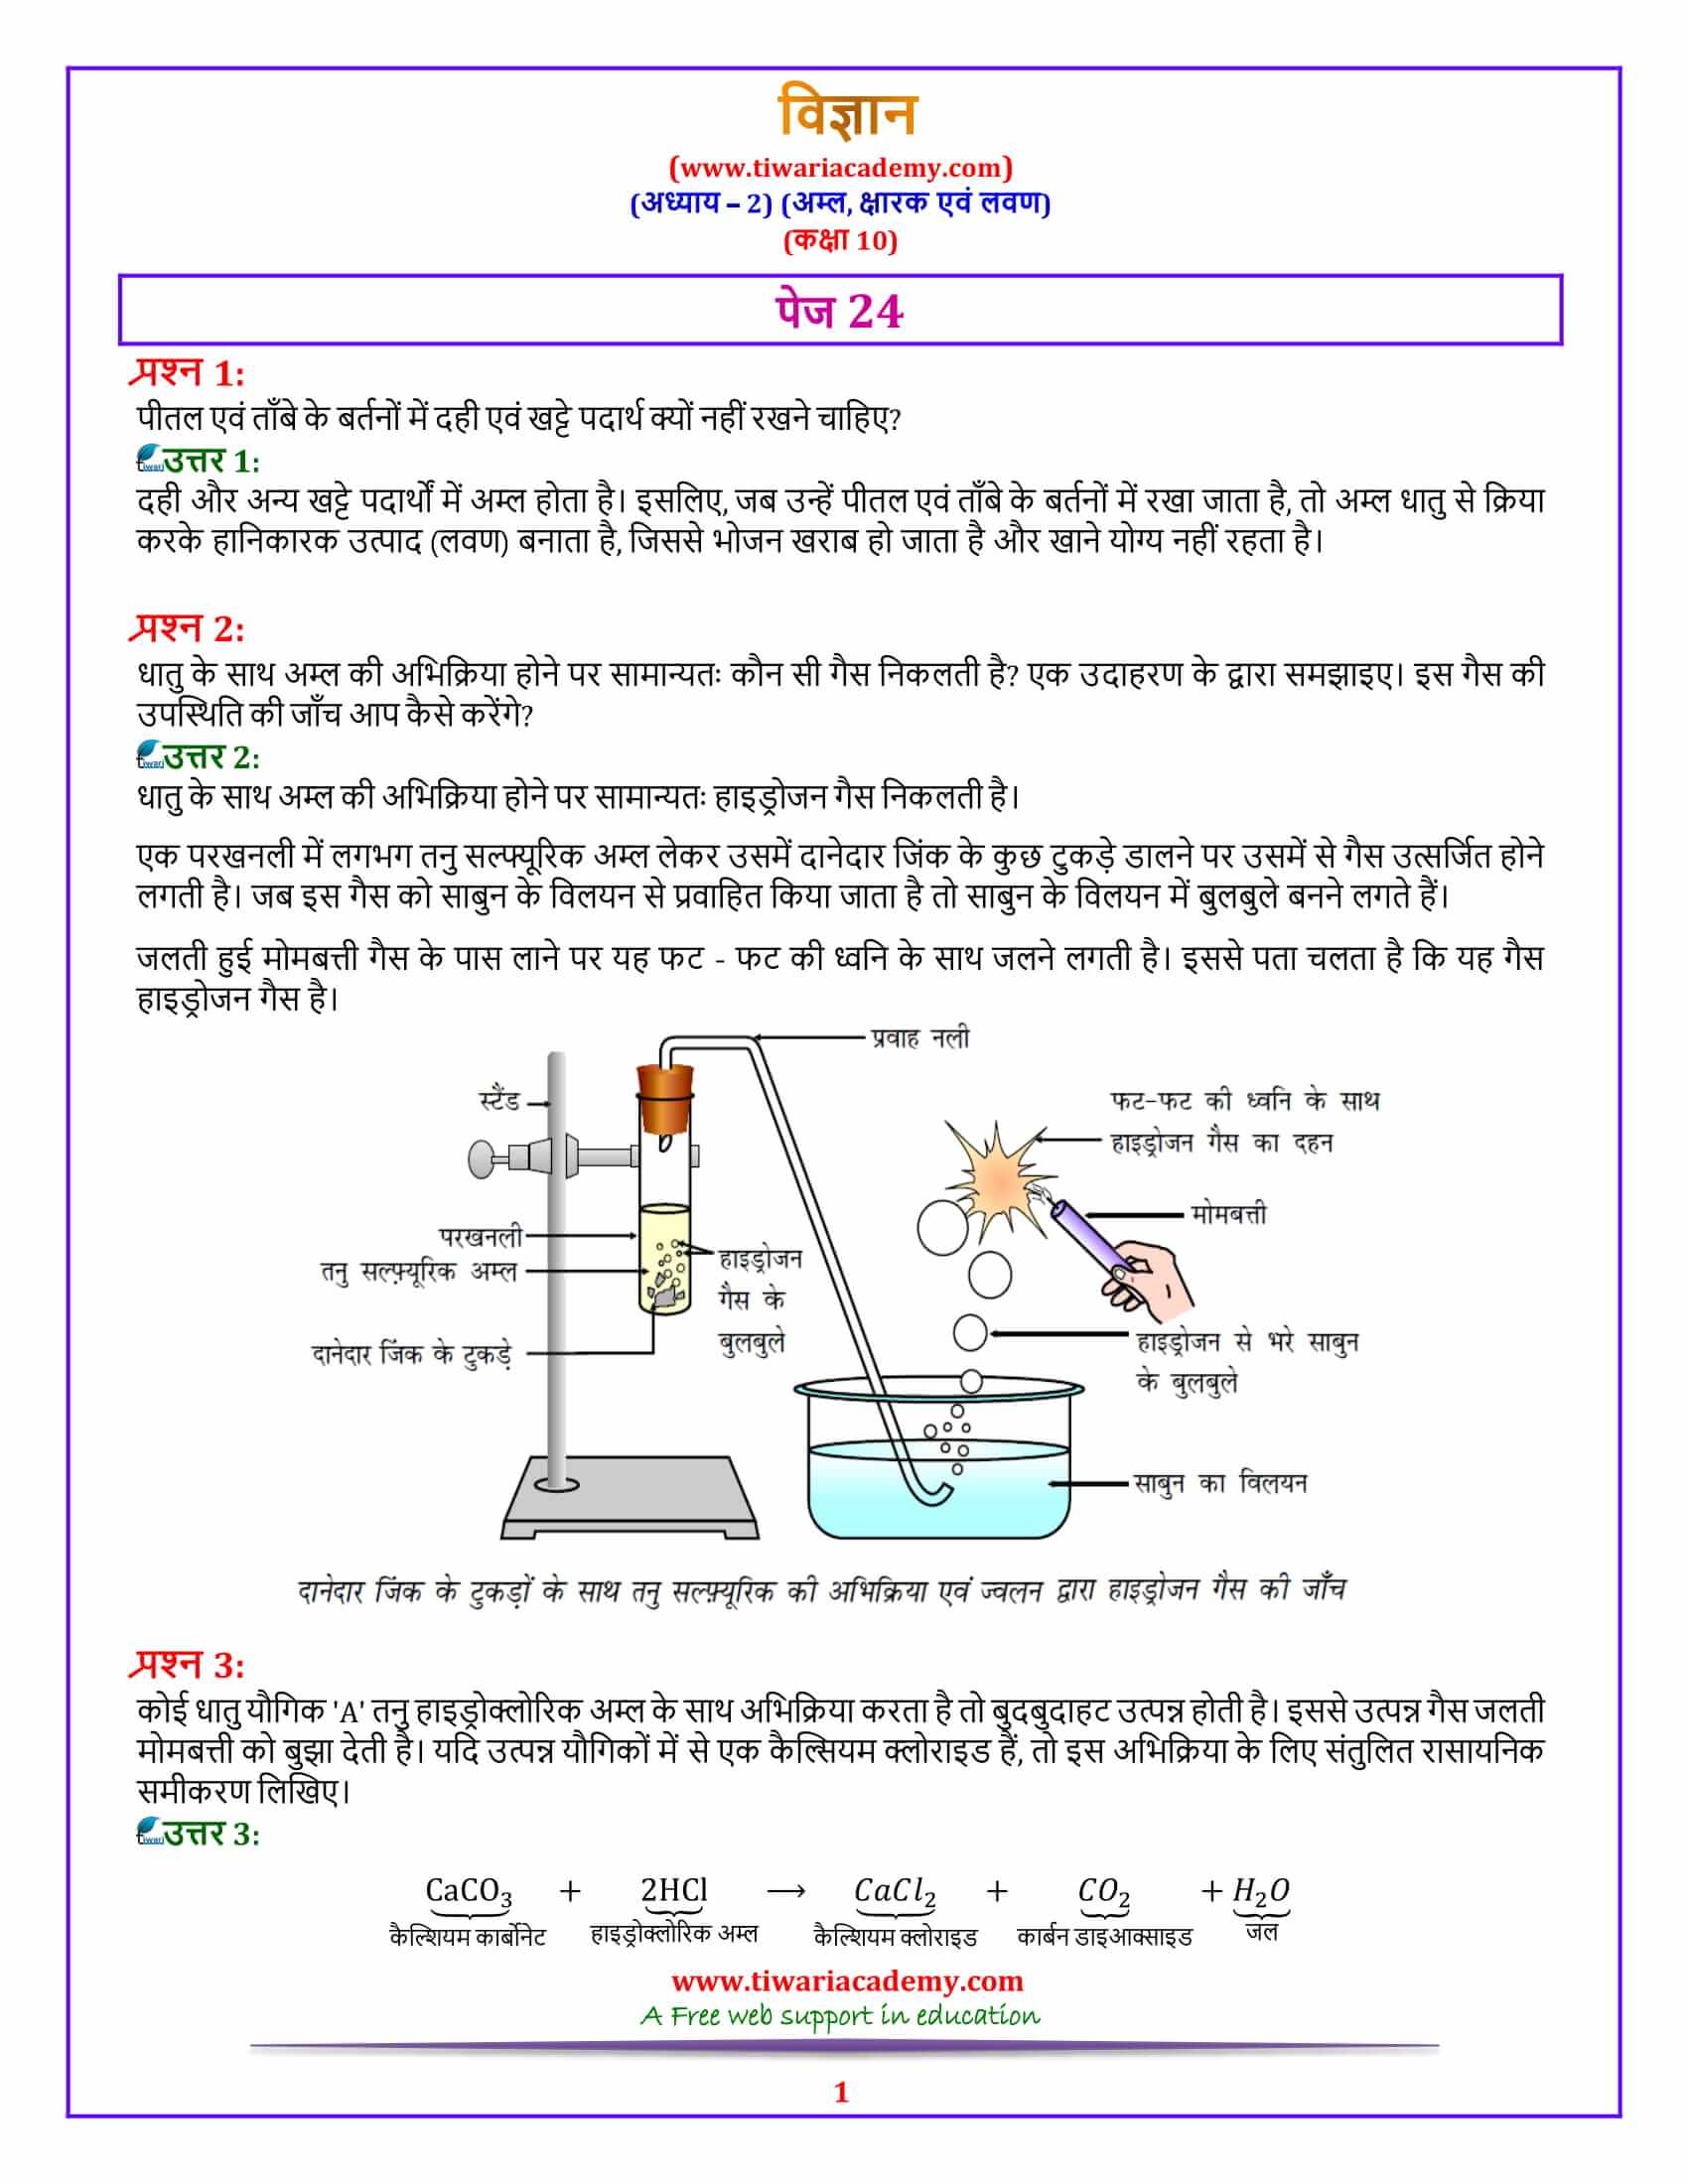 10 Science Chapter 2 Acids, Bases and Salts Intext questions पेज 24 के उत्तर